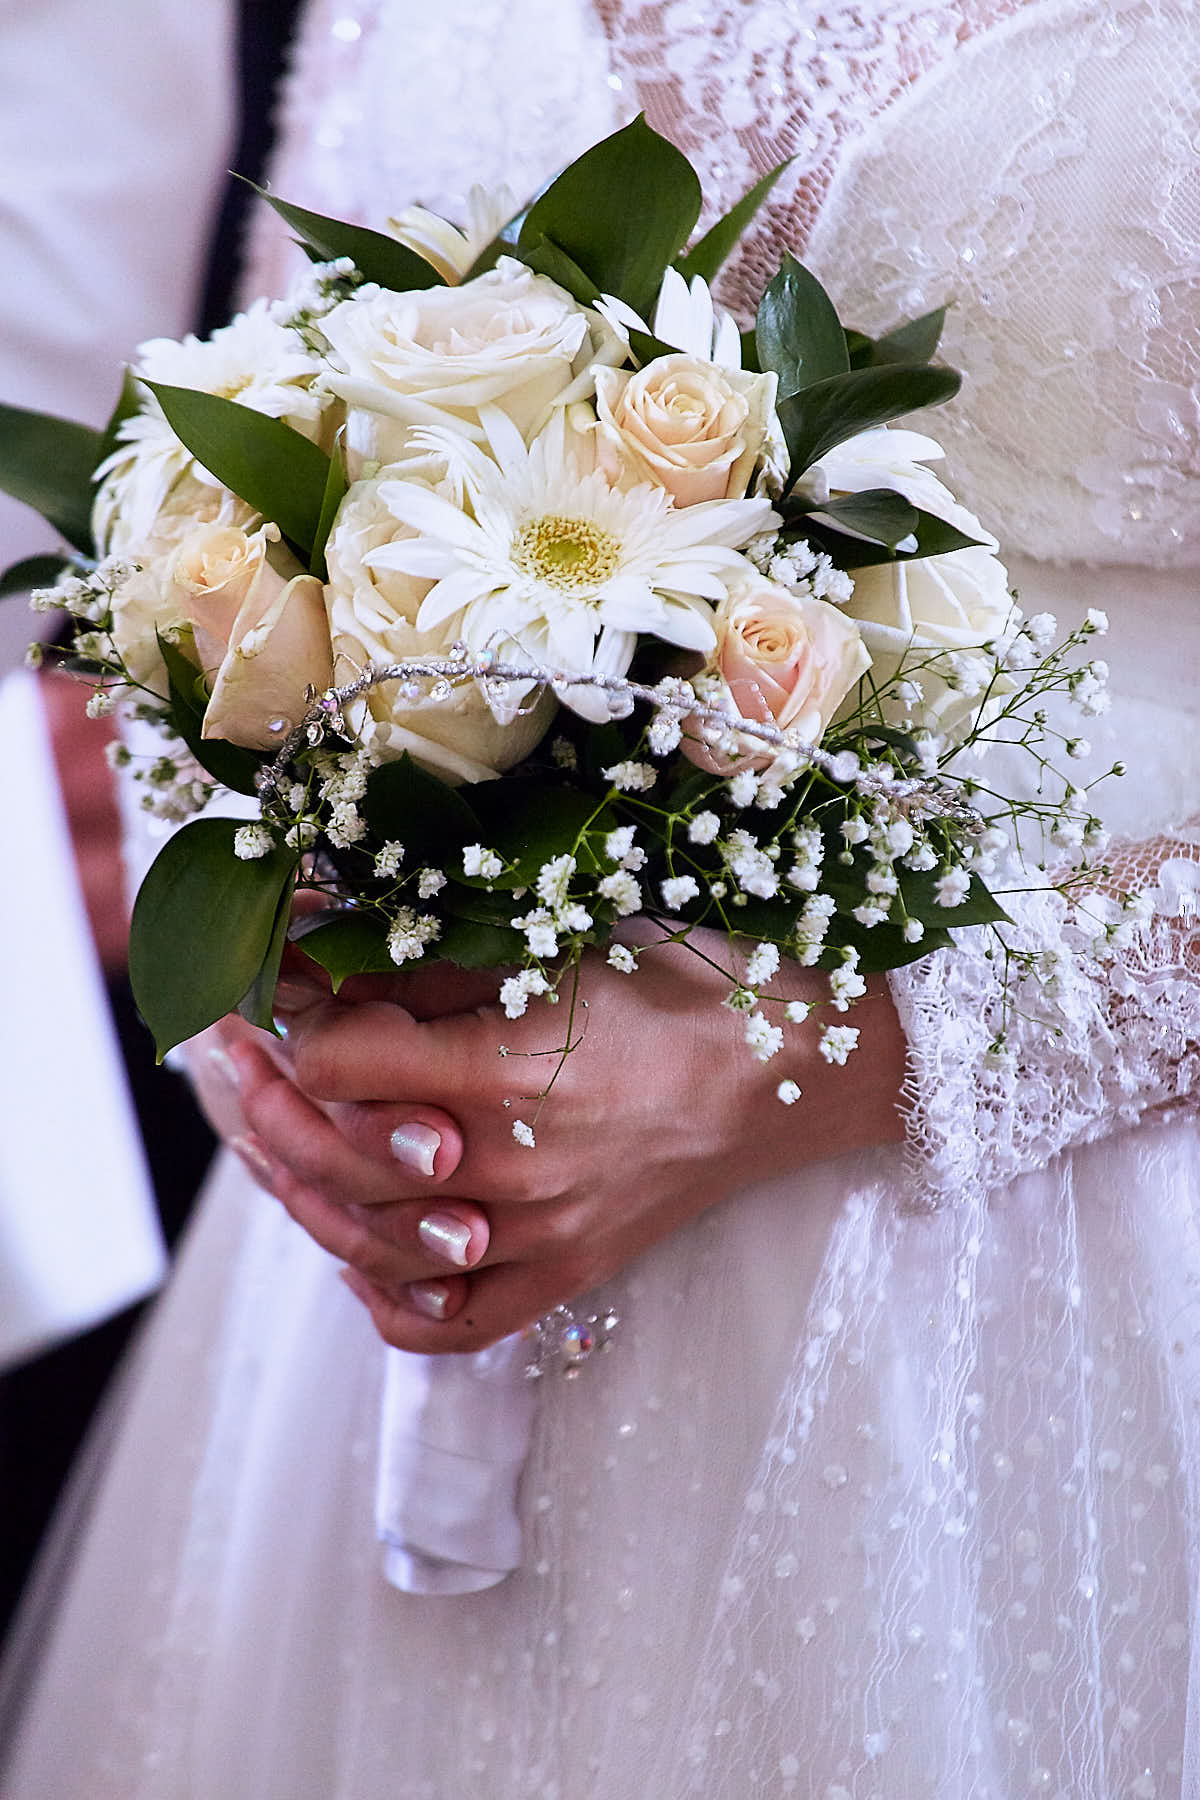 Detail of the bride's hands holding the white bouquet